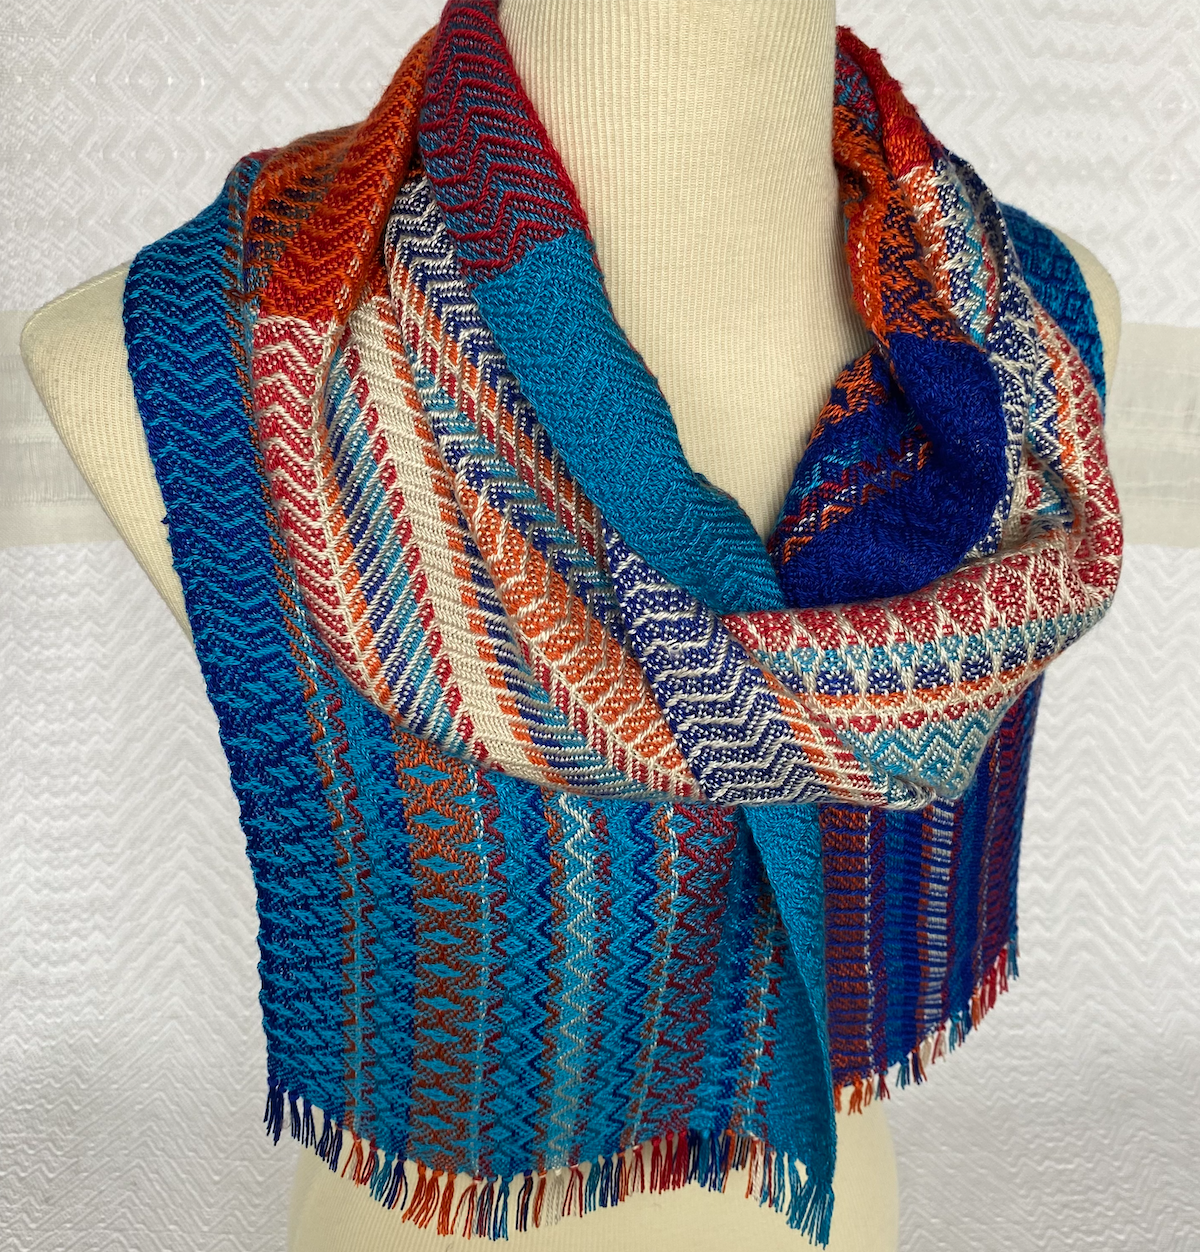  Stripes of Blue, Red, Orange and Cream Twill Handwoven Scarf   